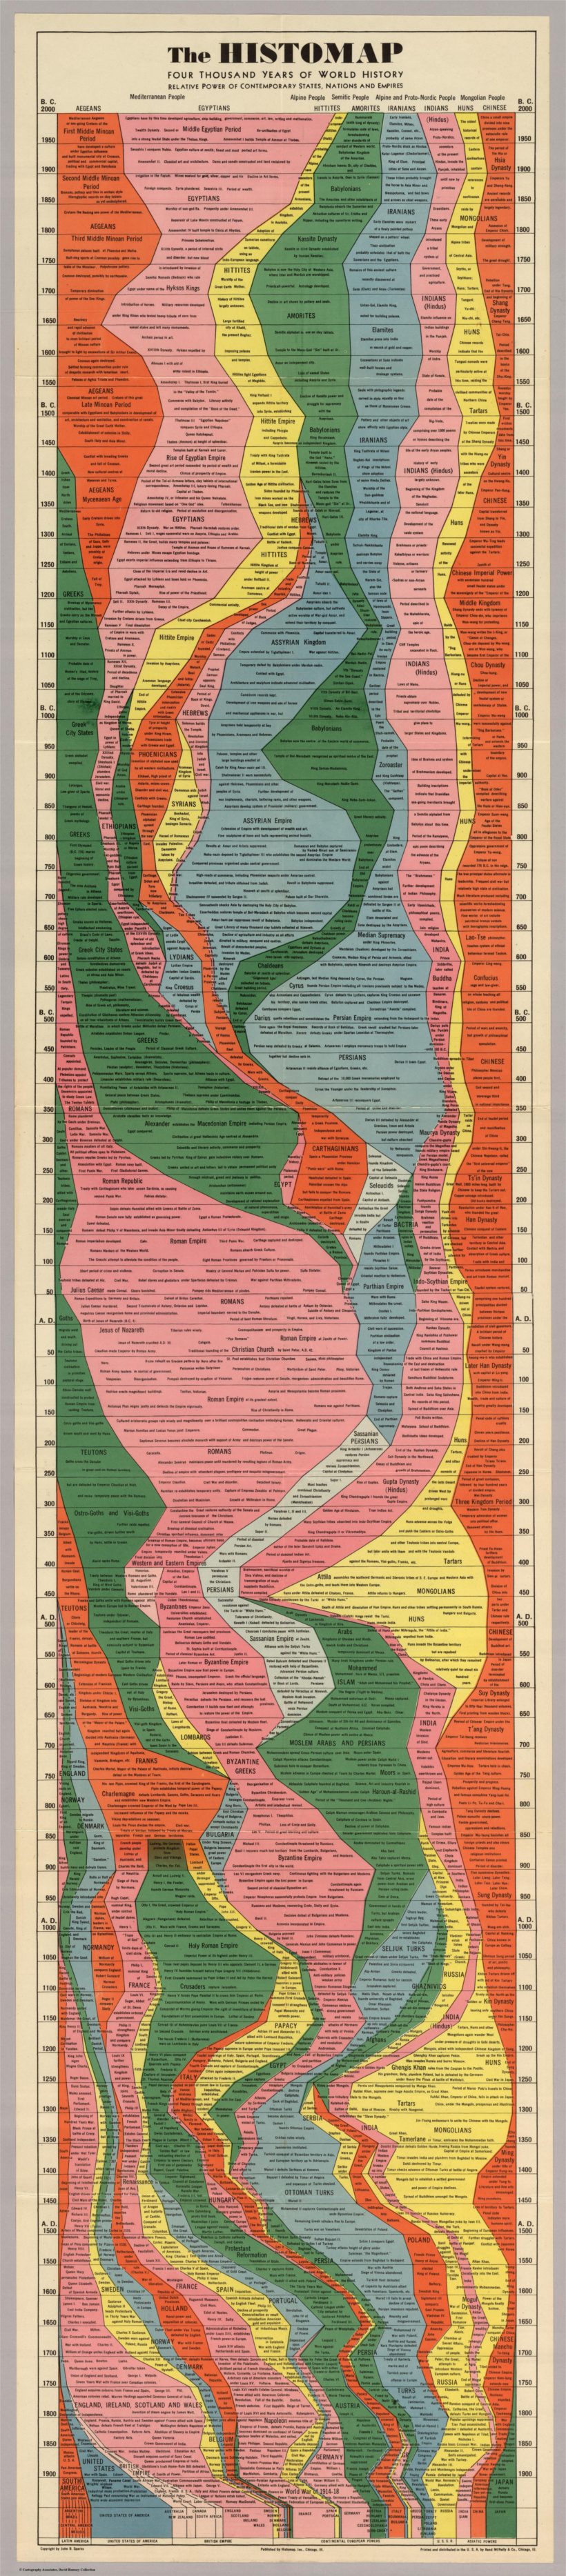 Histomap  Visualizing the 4 000 Year History of Global Power - 54